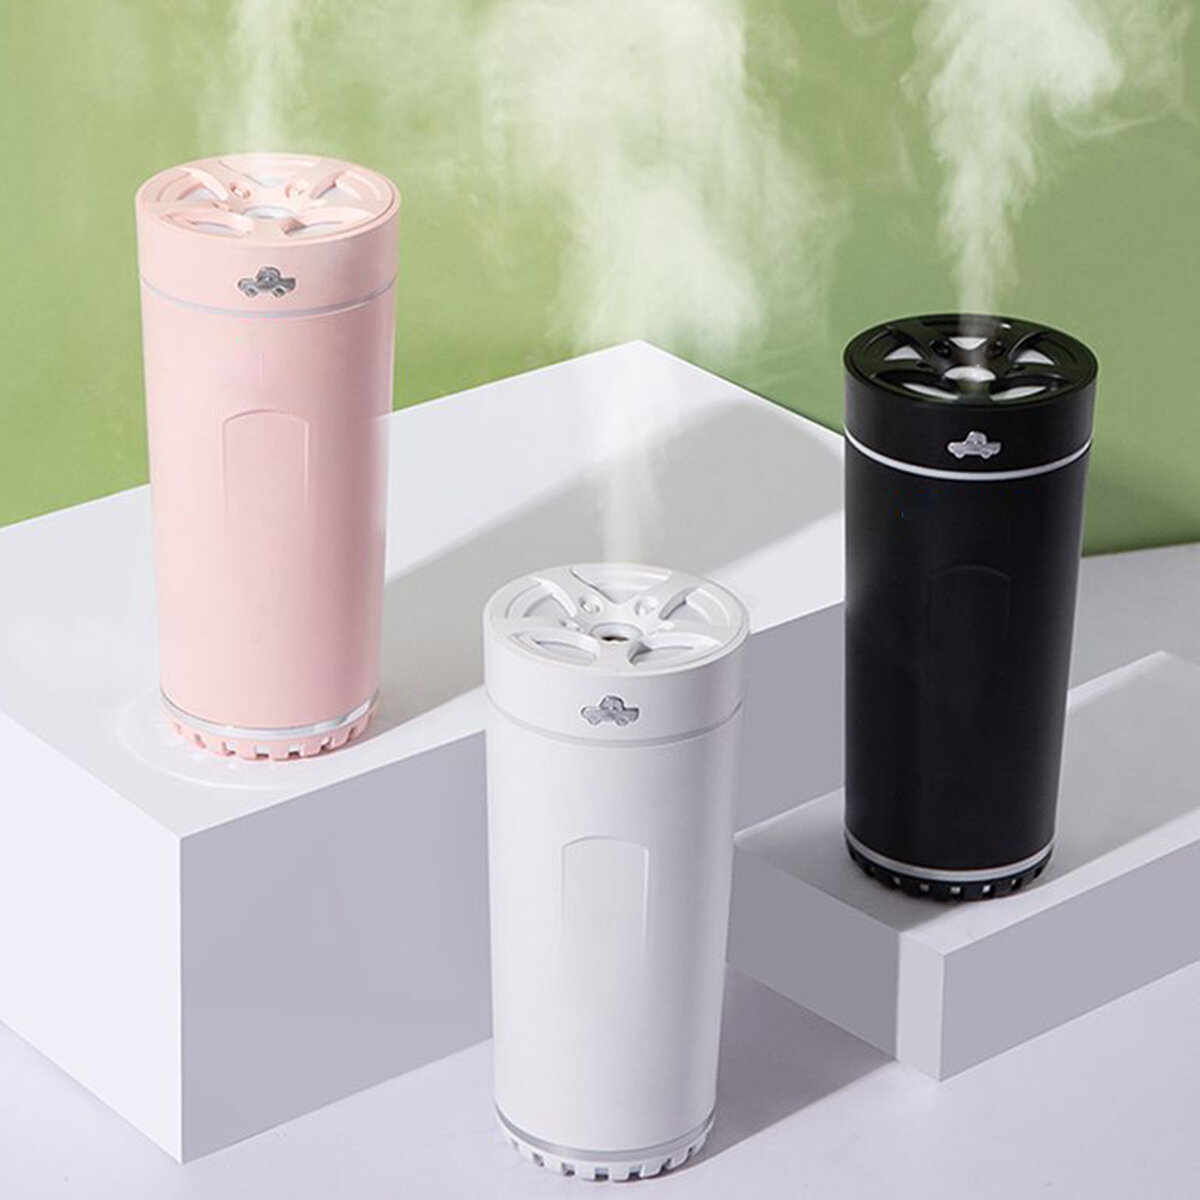 300ml Air Humidifier Aroma Diffuser Nano Atomization with Color Light 800mAh Battery Life USB Charging for Home Office C